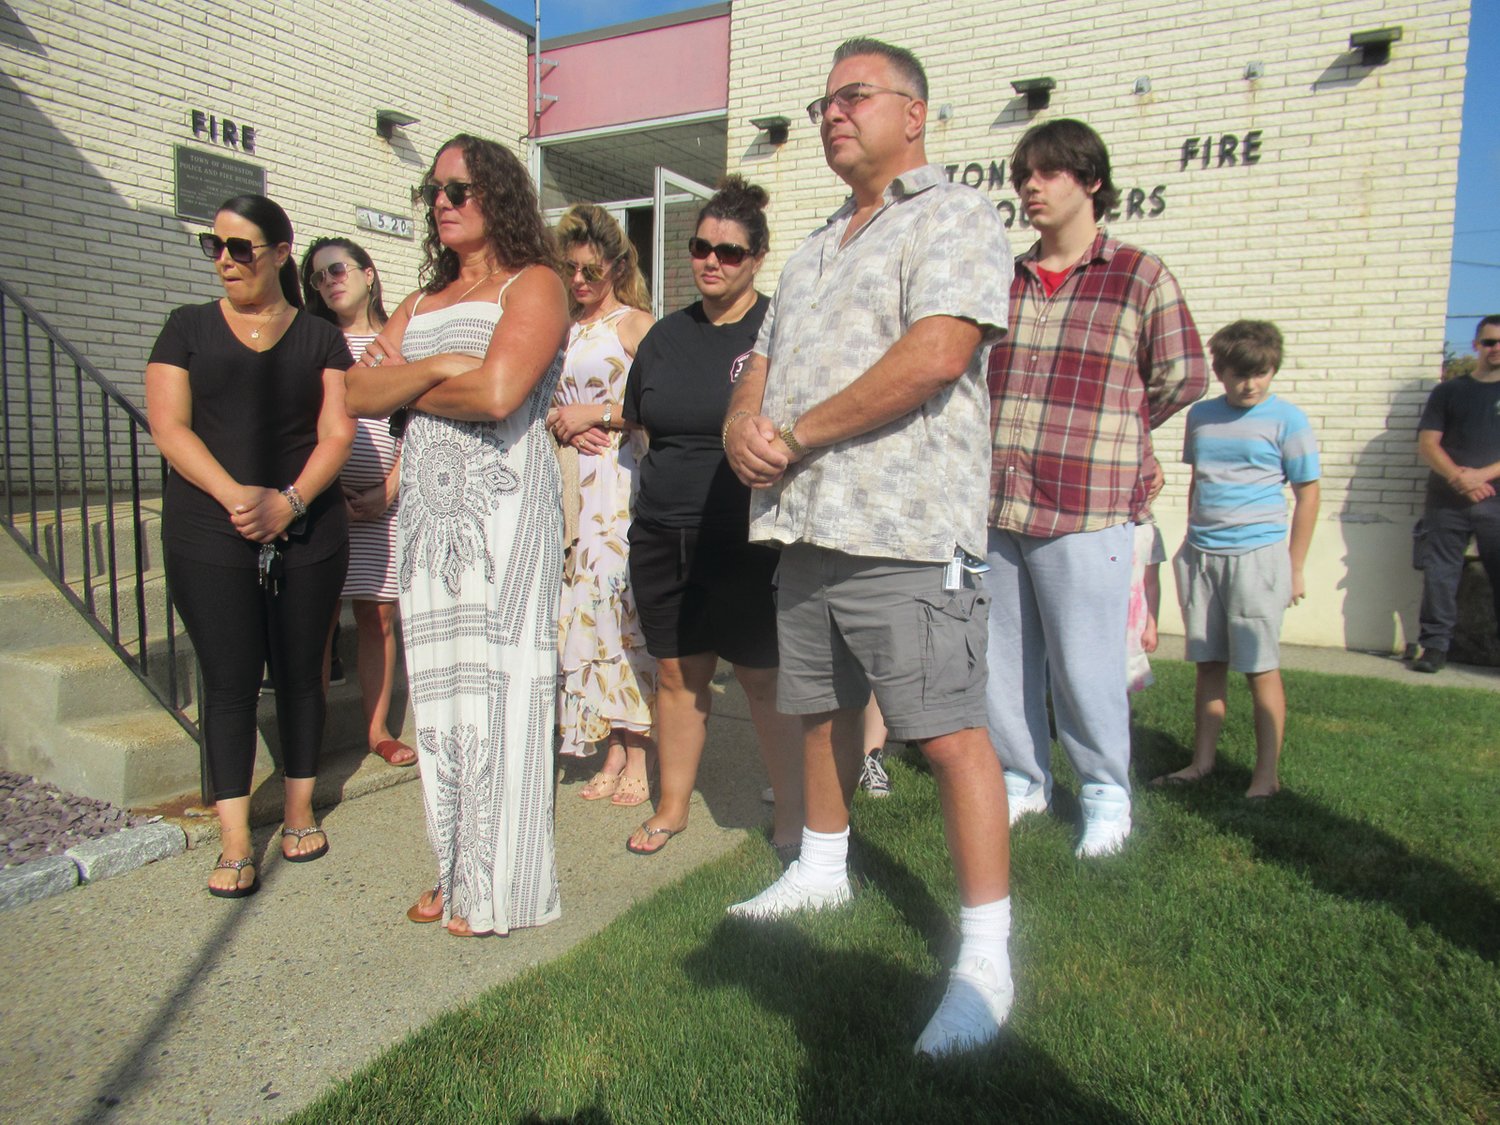 FAMILY, FRIENDS: A host of family, friends and Johnston Firefighters turned out Saturday for the third Annual Memorial Service in honor of the late Richard Gemma was died from injuries he suffered when his motorcycle crashed only 100 yards from his home in Cranston back in 2019.